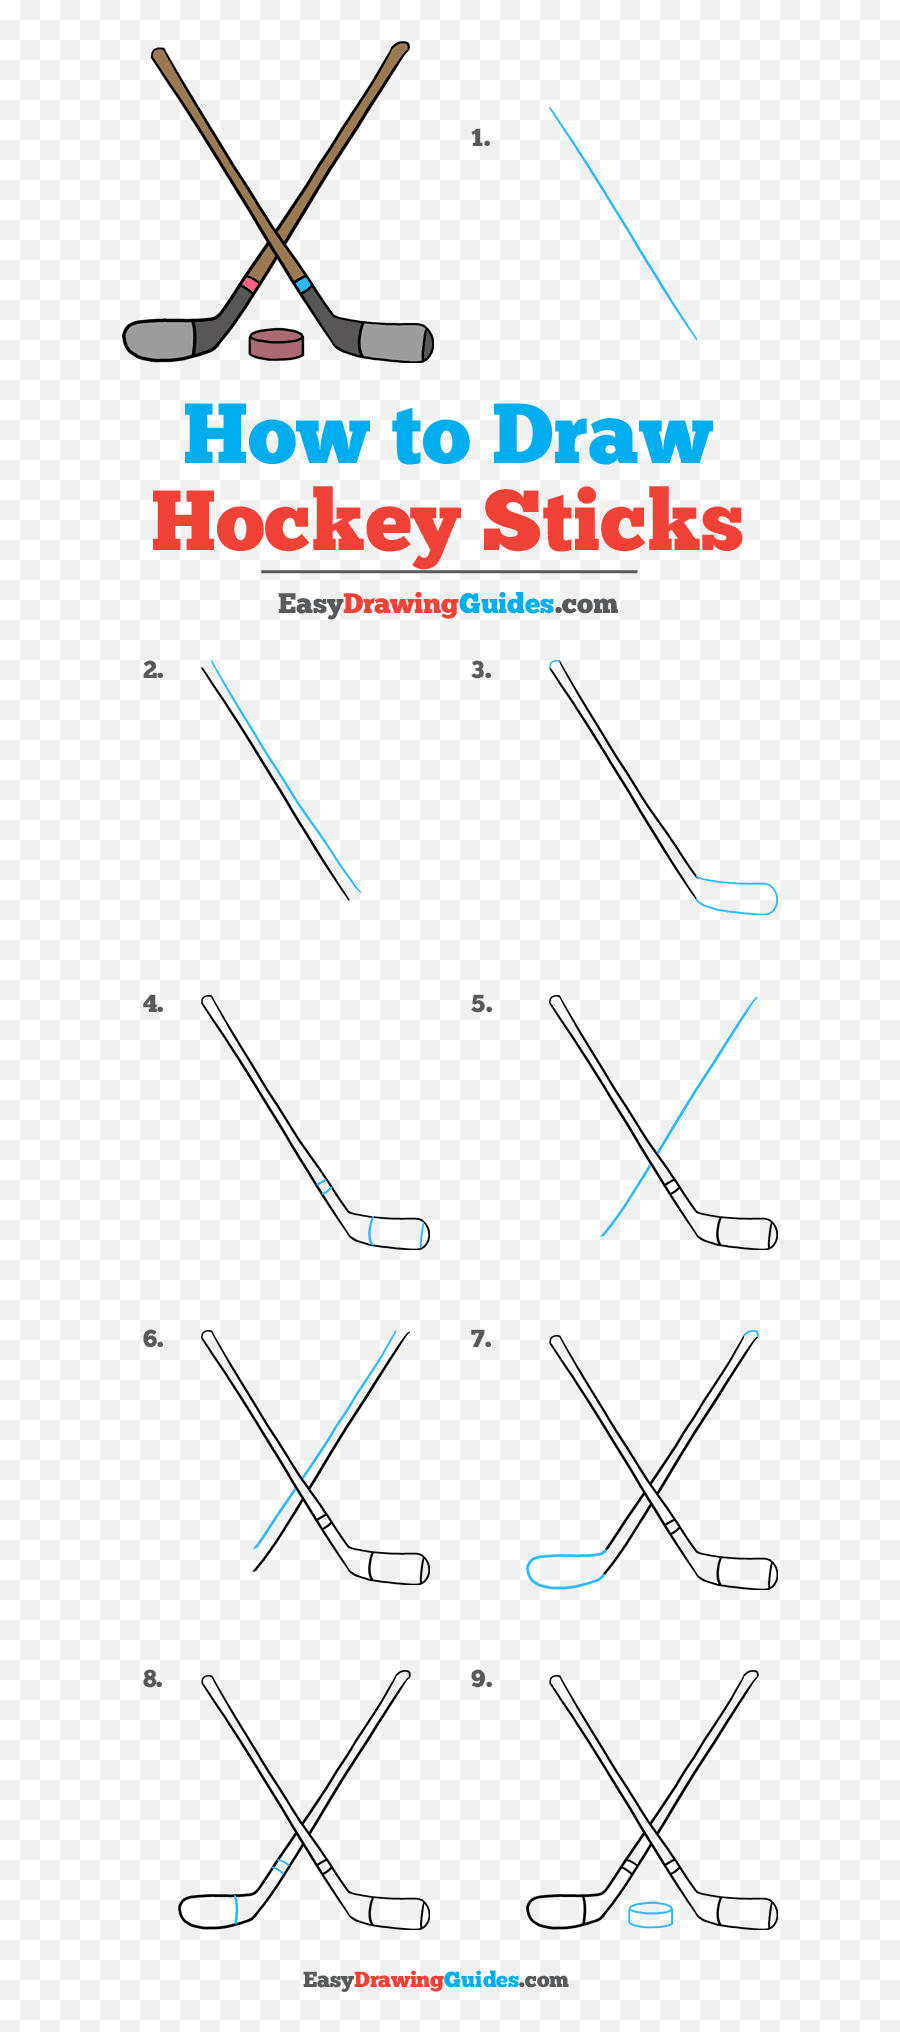 How To Draw Hockey Sticks - Really Easy Drawing Tutorial Bank Systems And Technology Emoji,Hockey Sticks Clipart